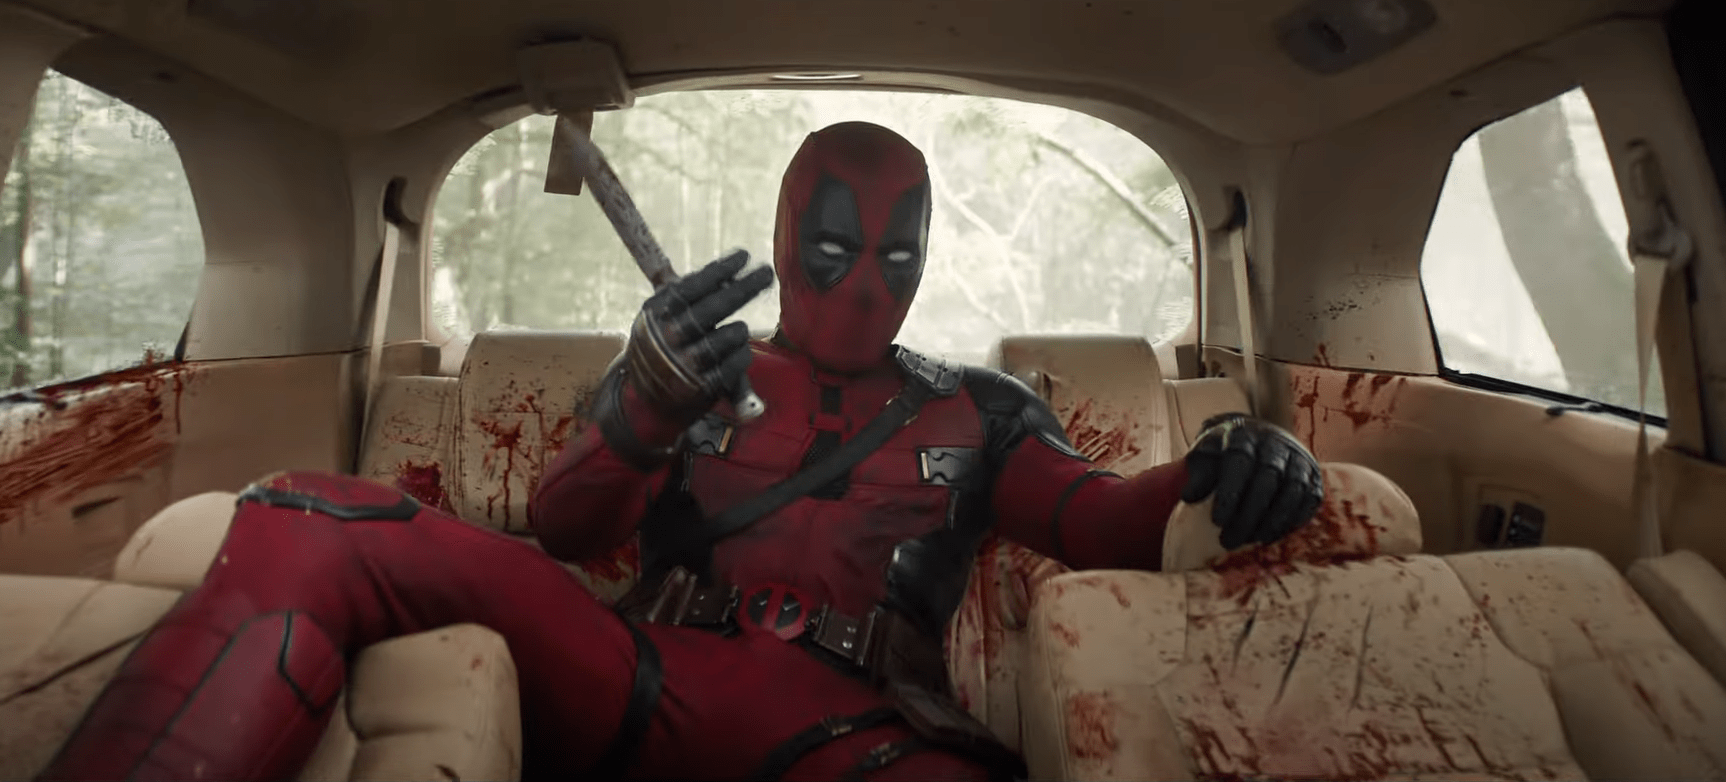 ‘Deadpool & Wolverine’ Super Bowl Trailer Brings Bloody Comedy into the Marvel Cinematic Universe